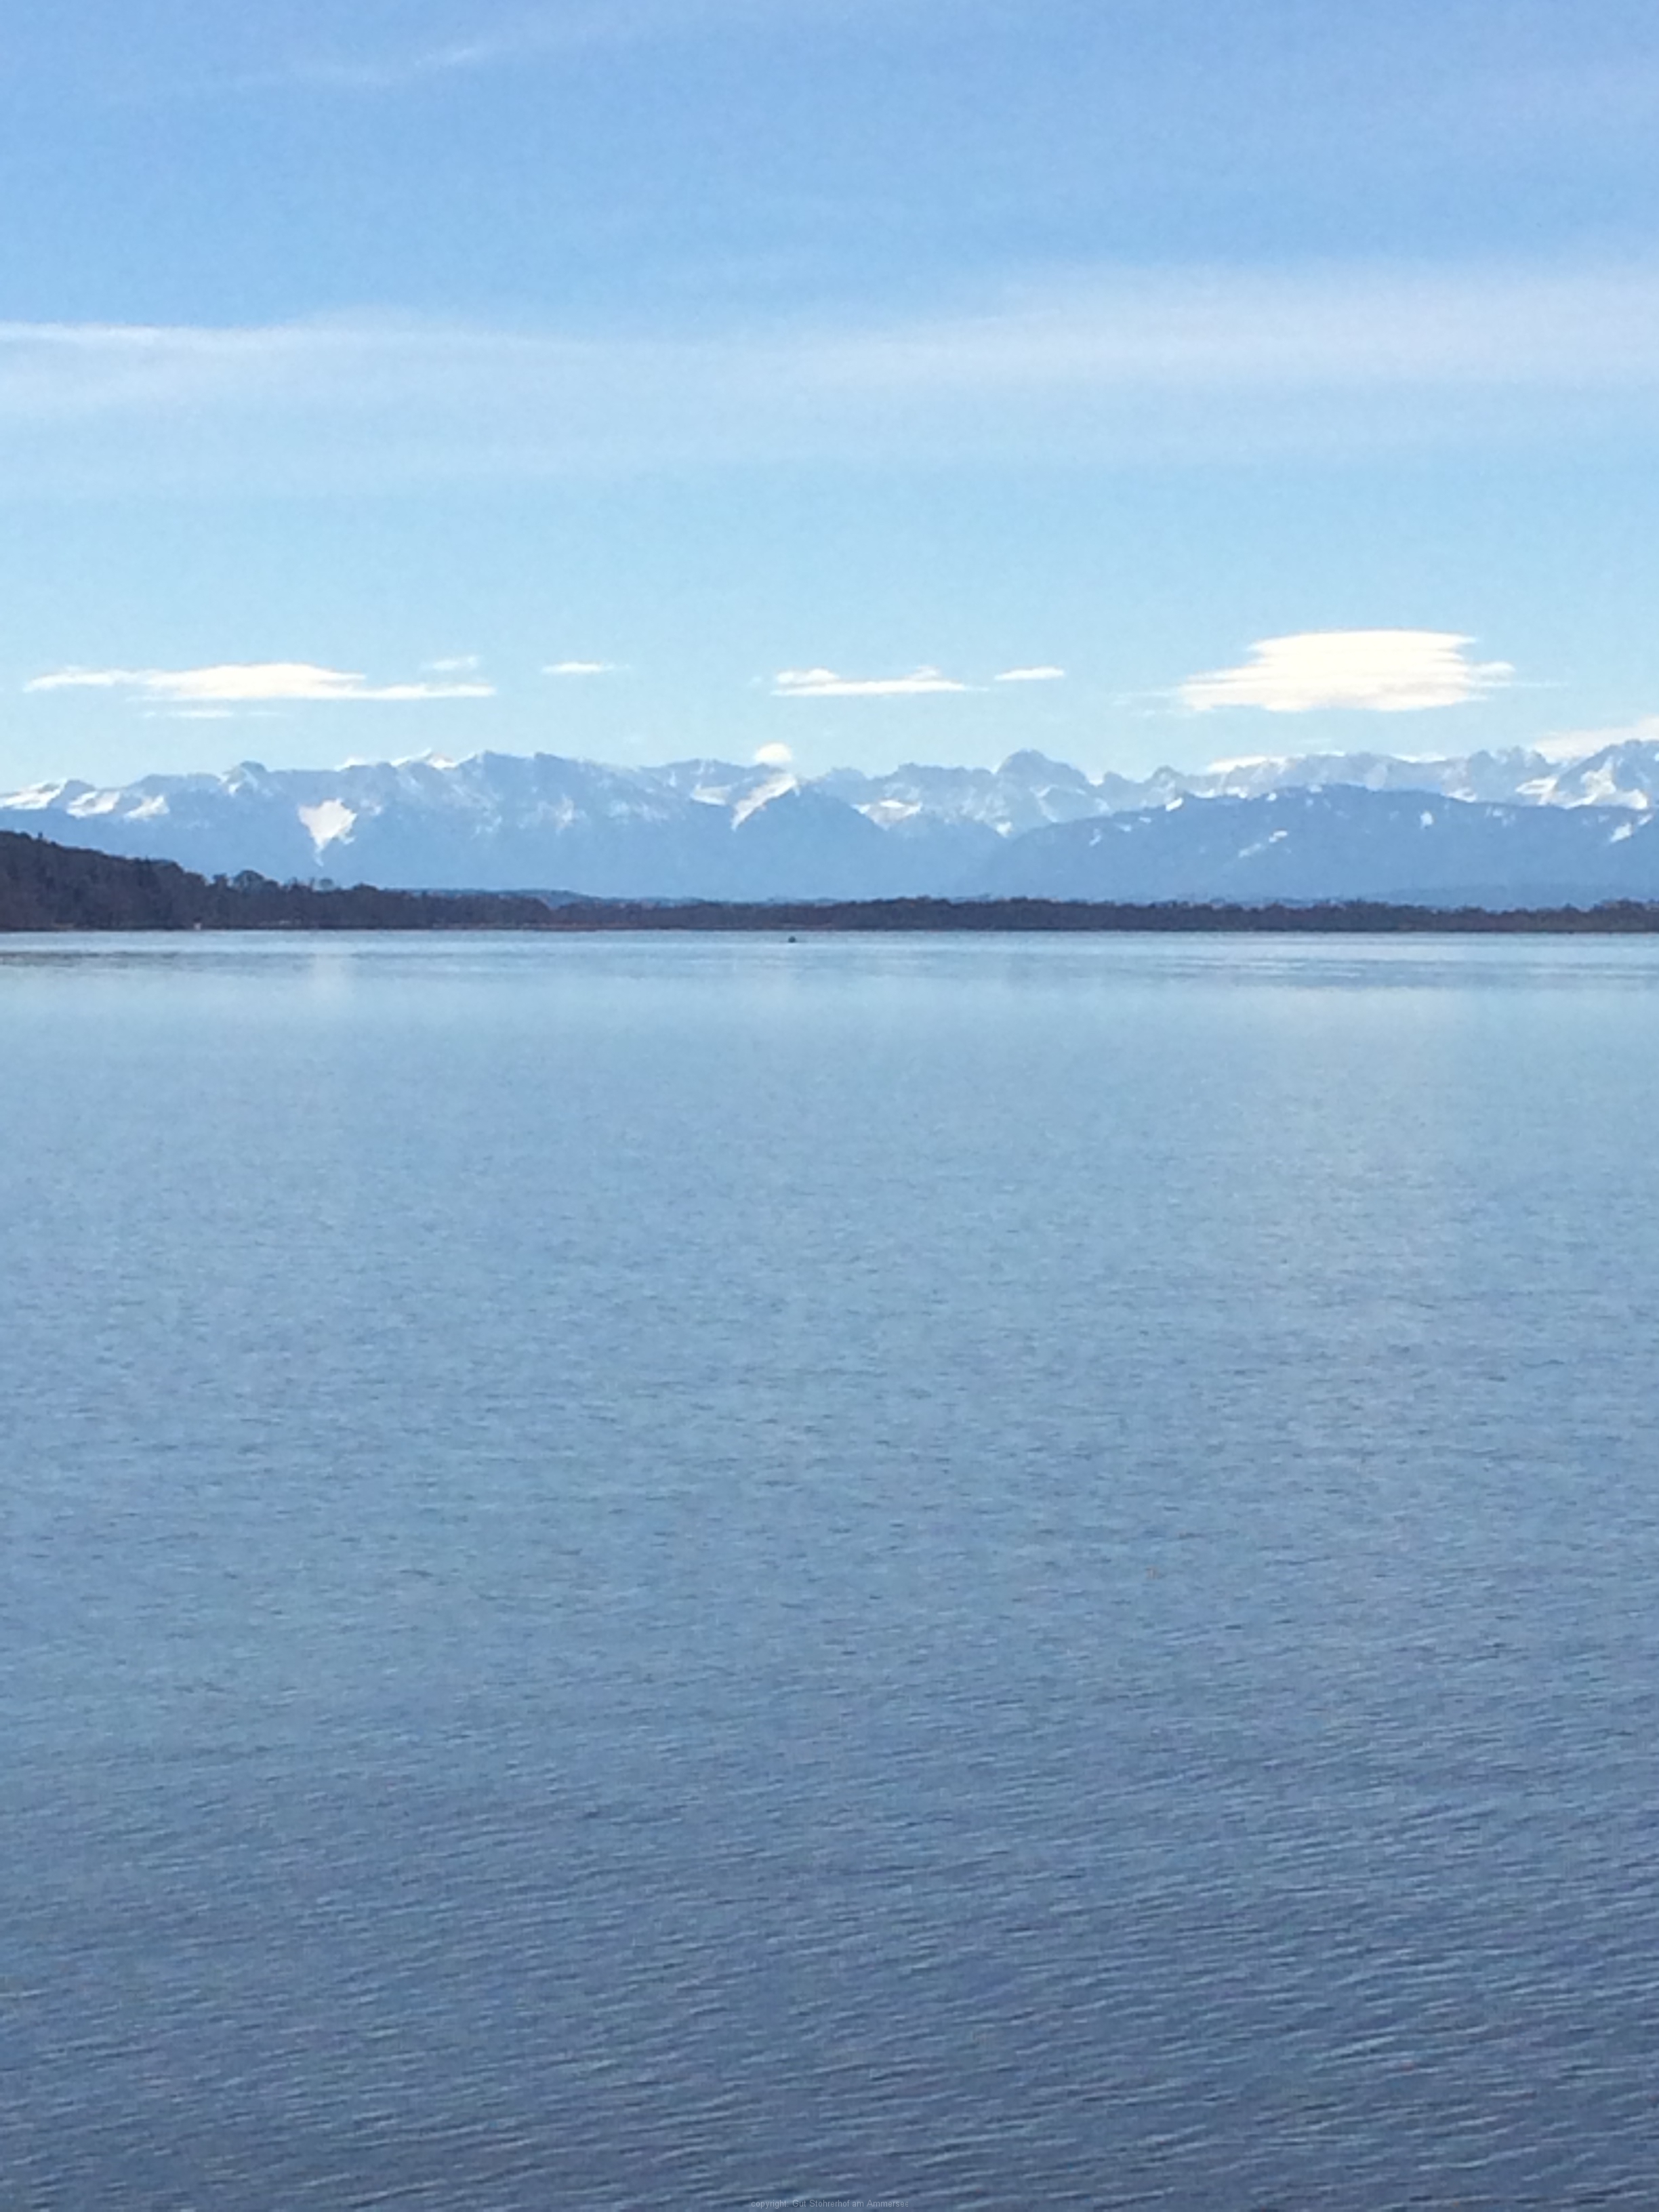 29 Ammersee & Berge